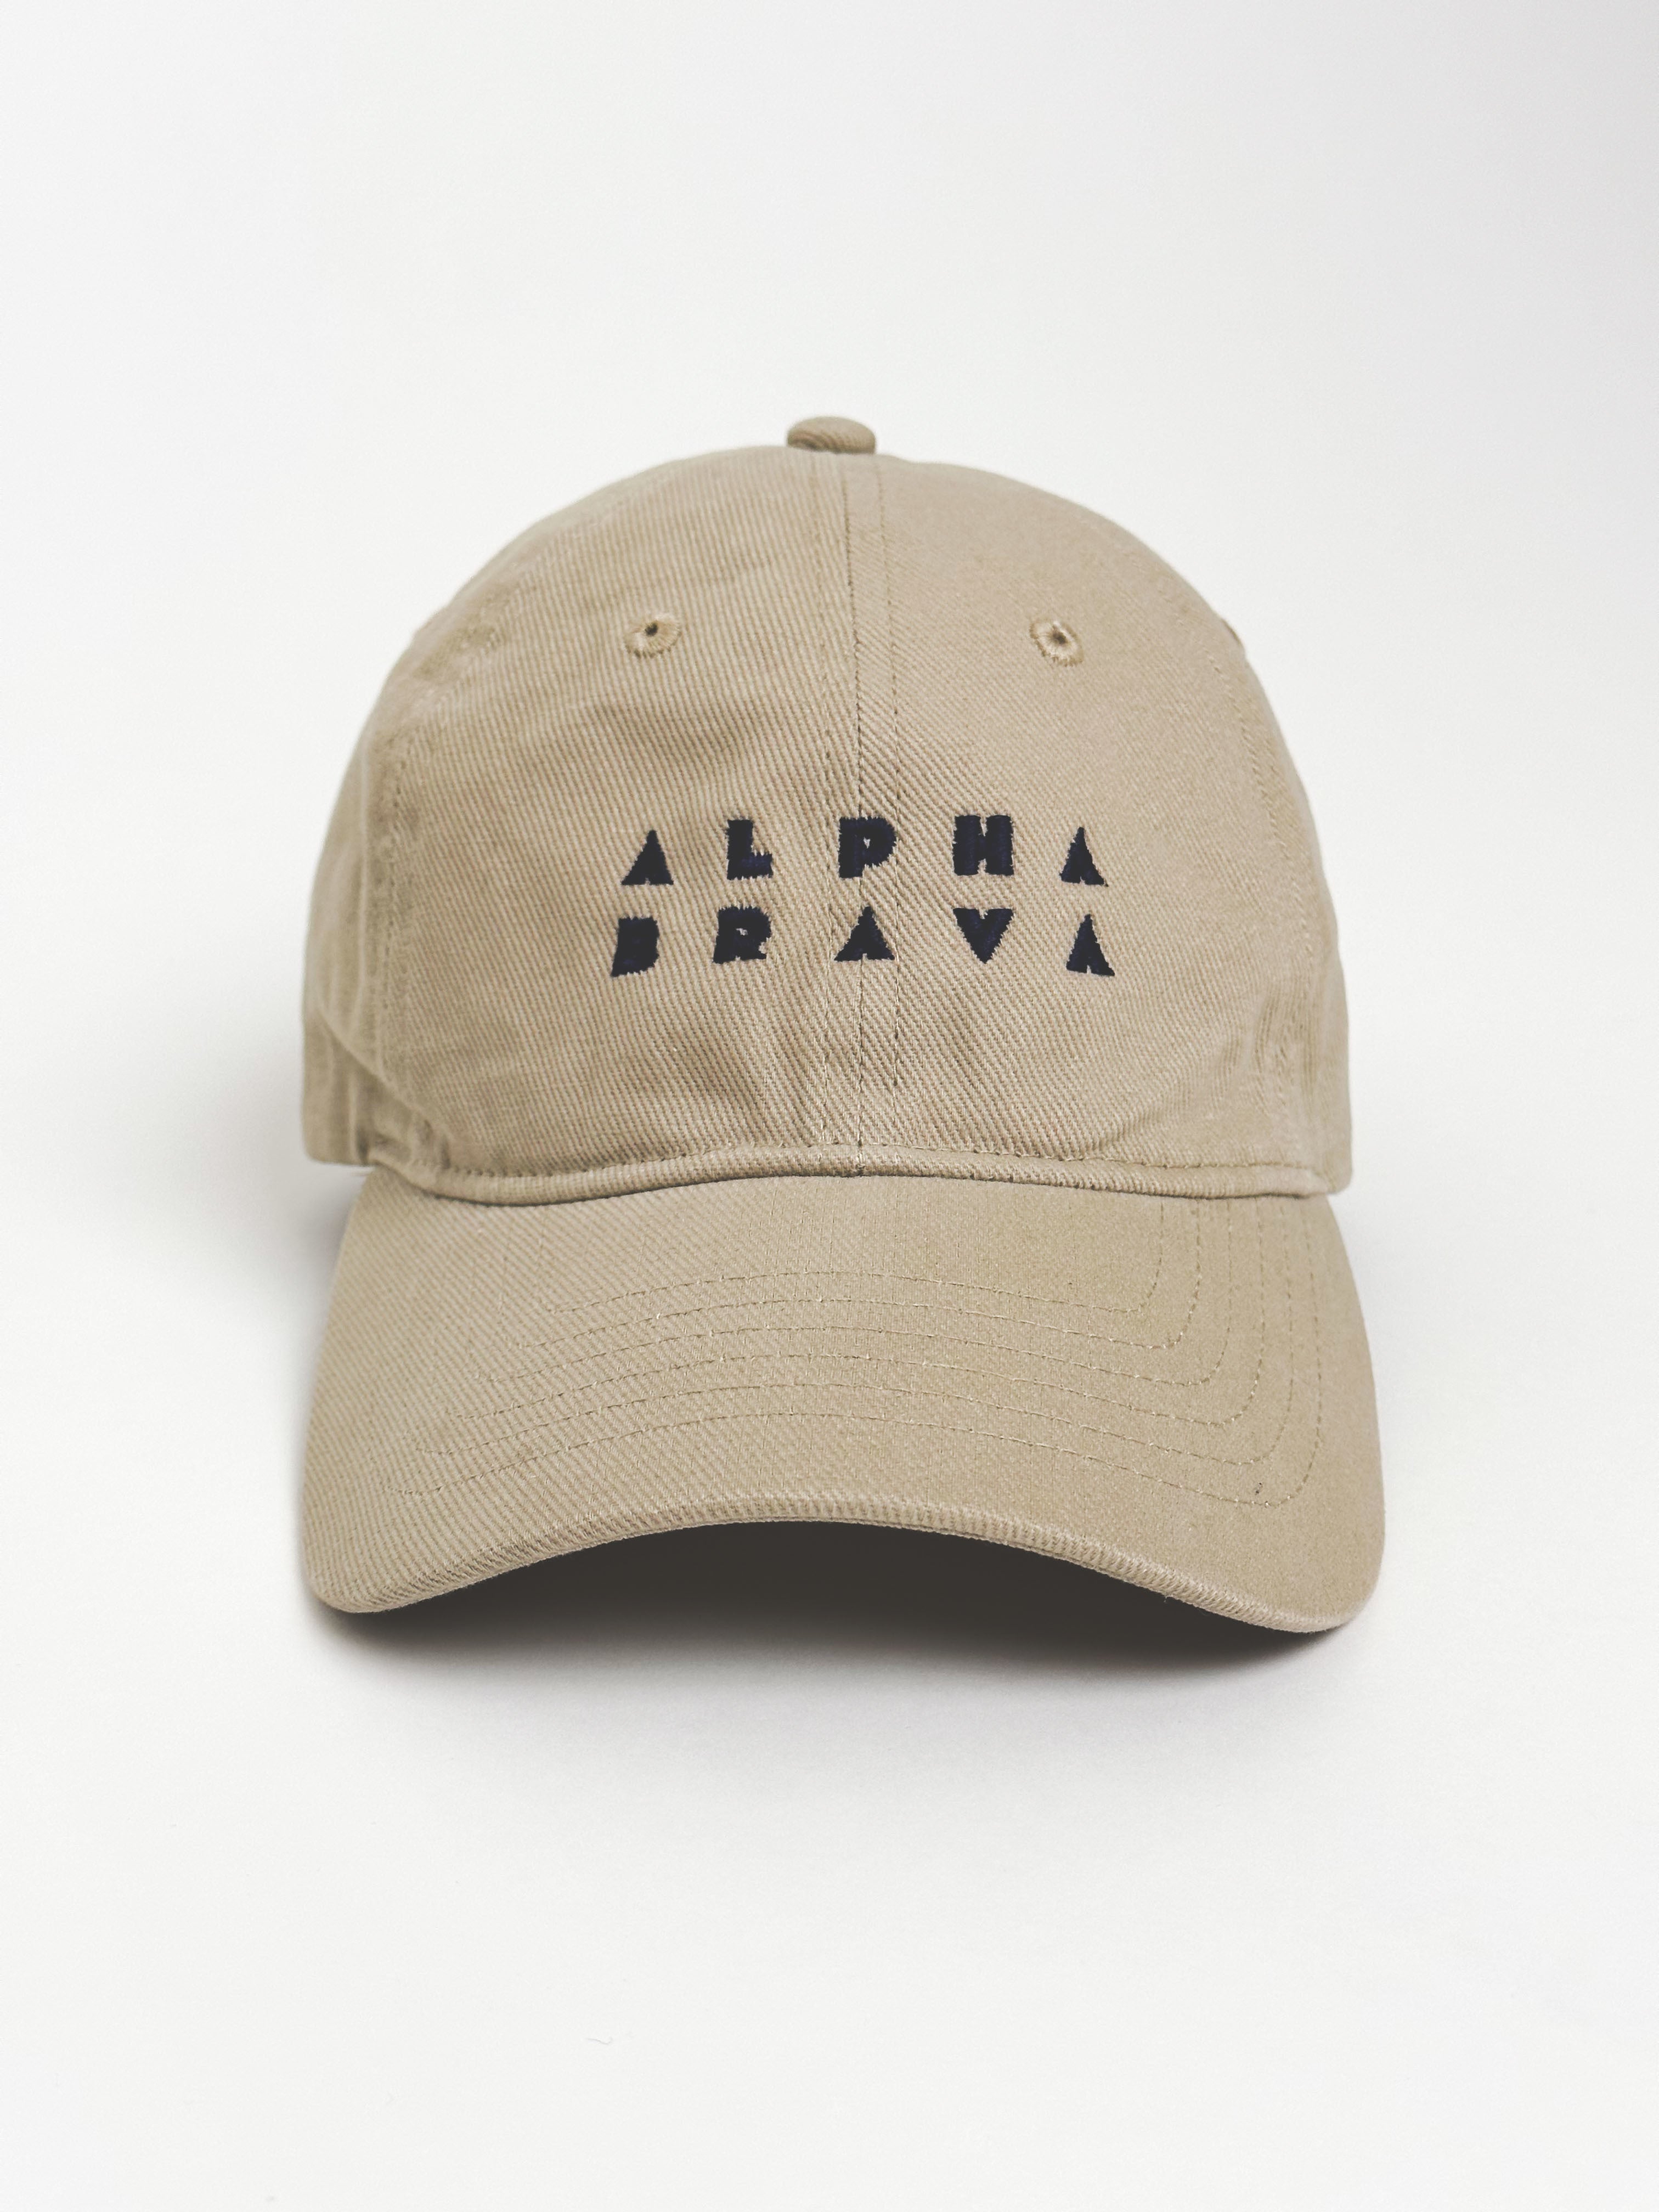 AB Dad Hat in Khaki - front view